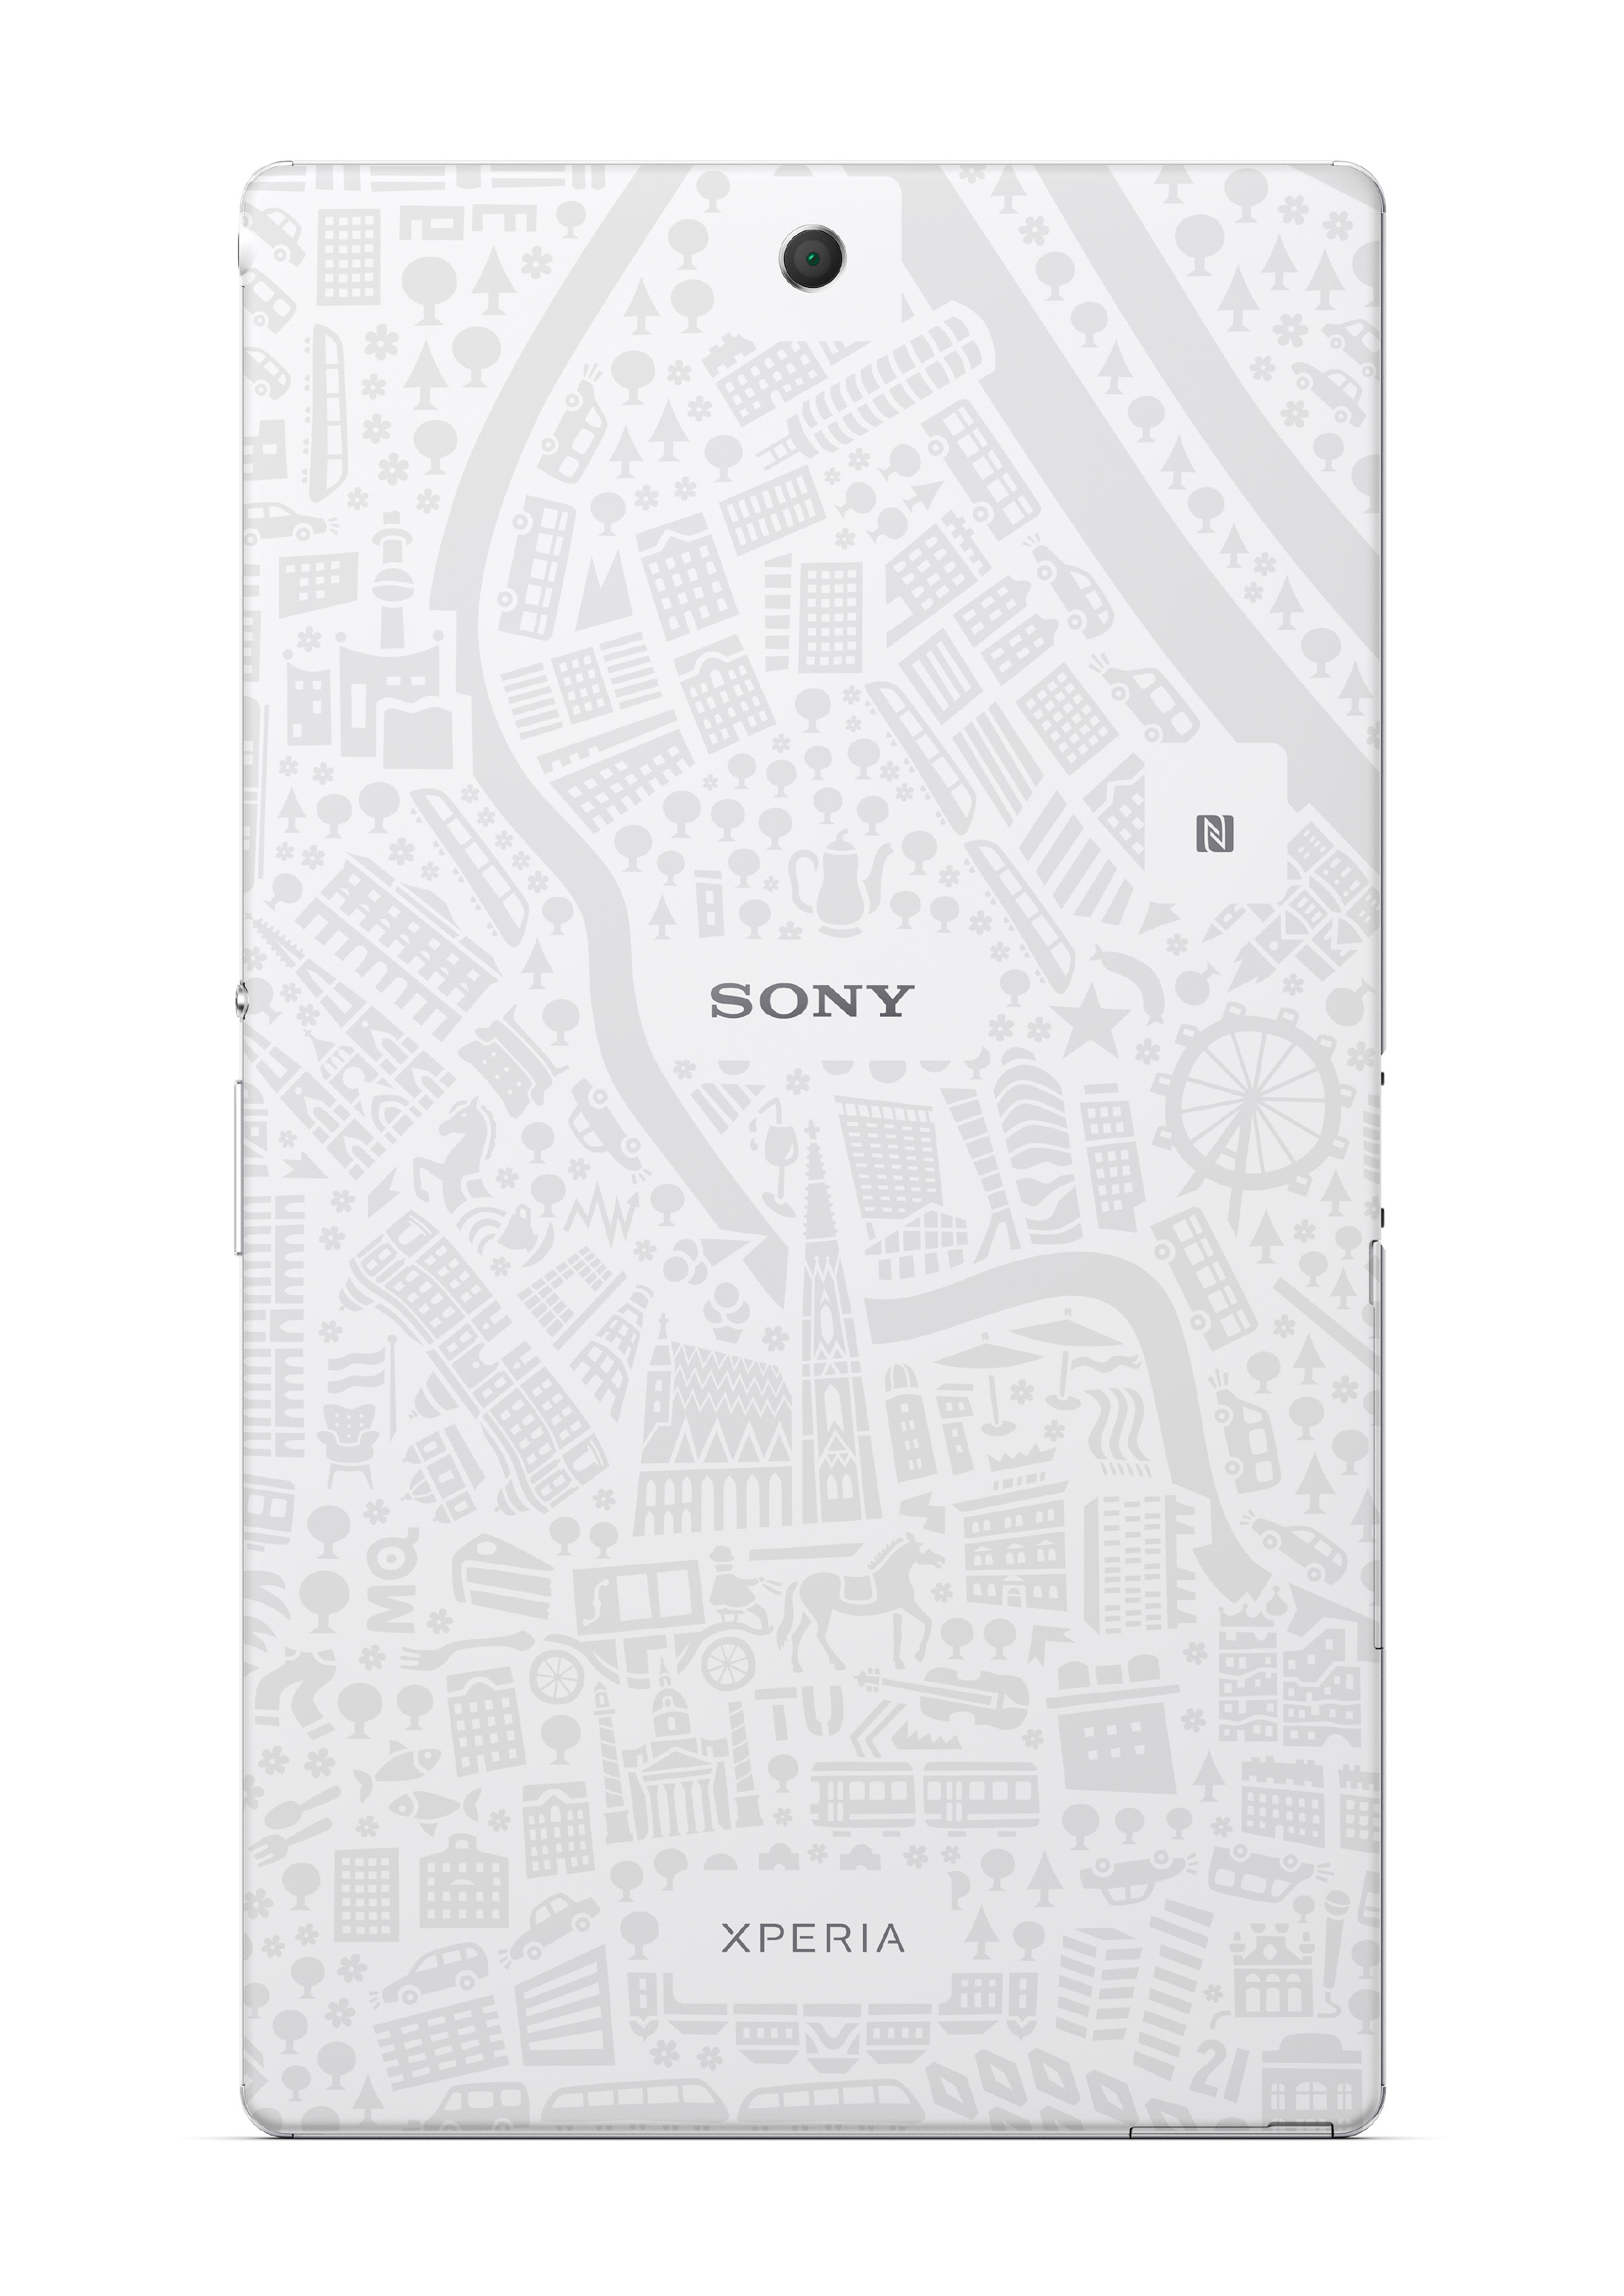 Xperia Z3 Tablet Compact for Vienna